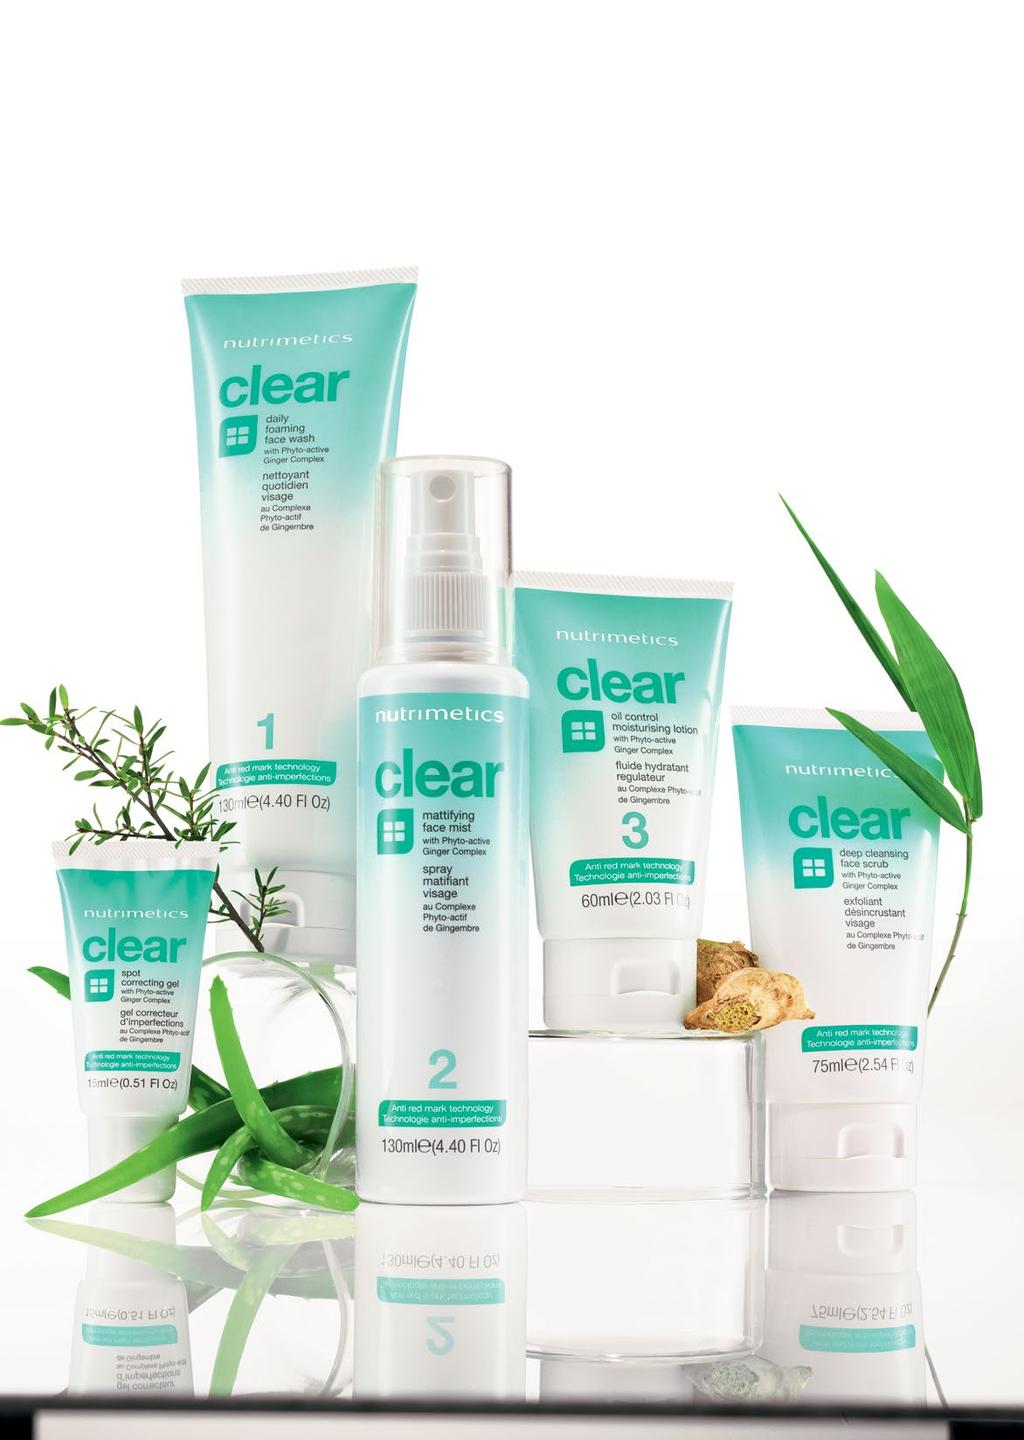 Buy the Set and save, $60 OFF! Clear 5 Piece Set $152.